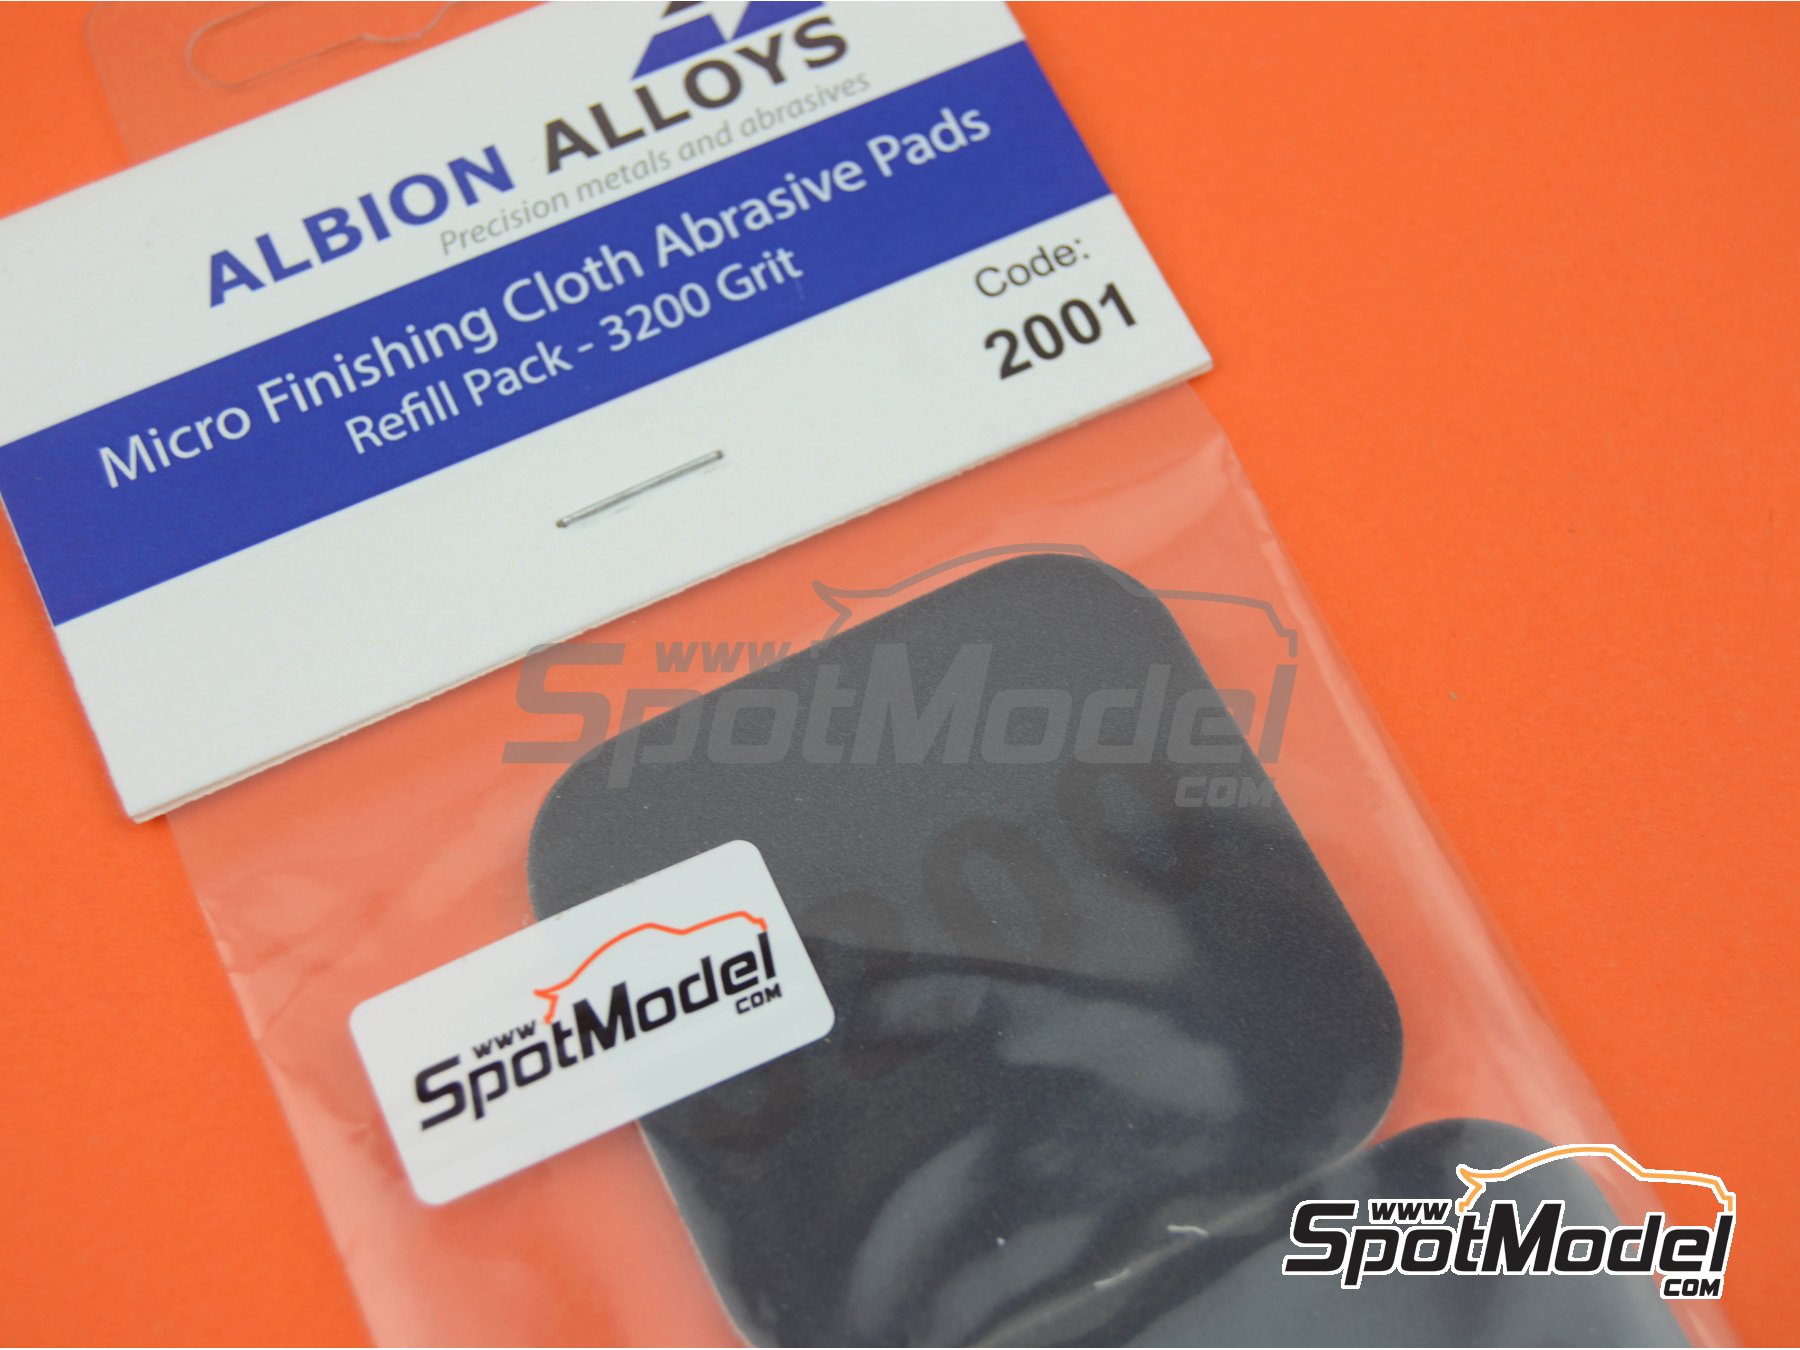 Albion Alloys Micro Finishing Cloth Abrasive Pads 8000 Grit Ref 2005 